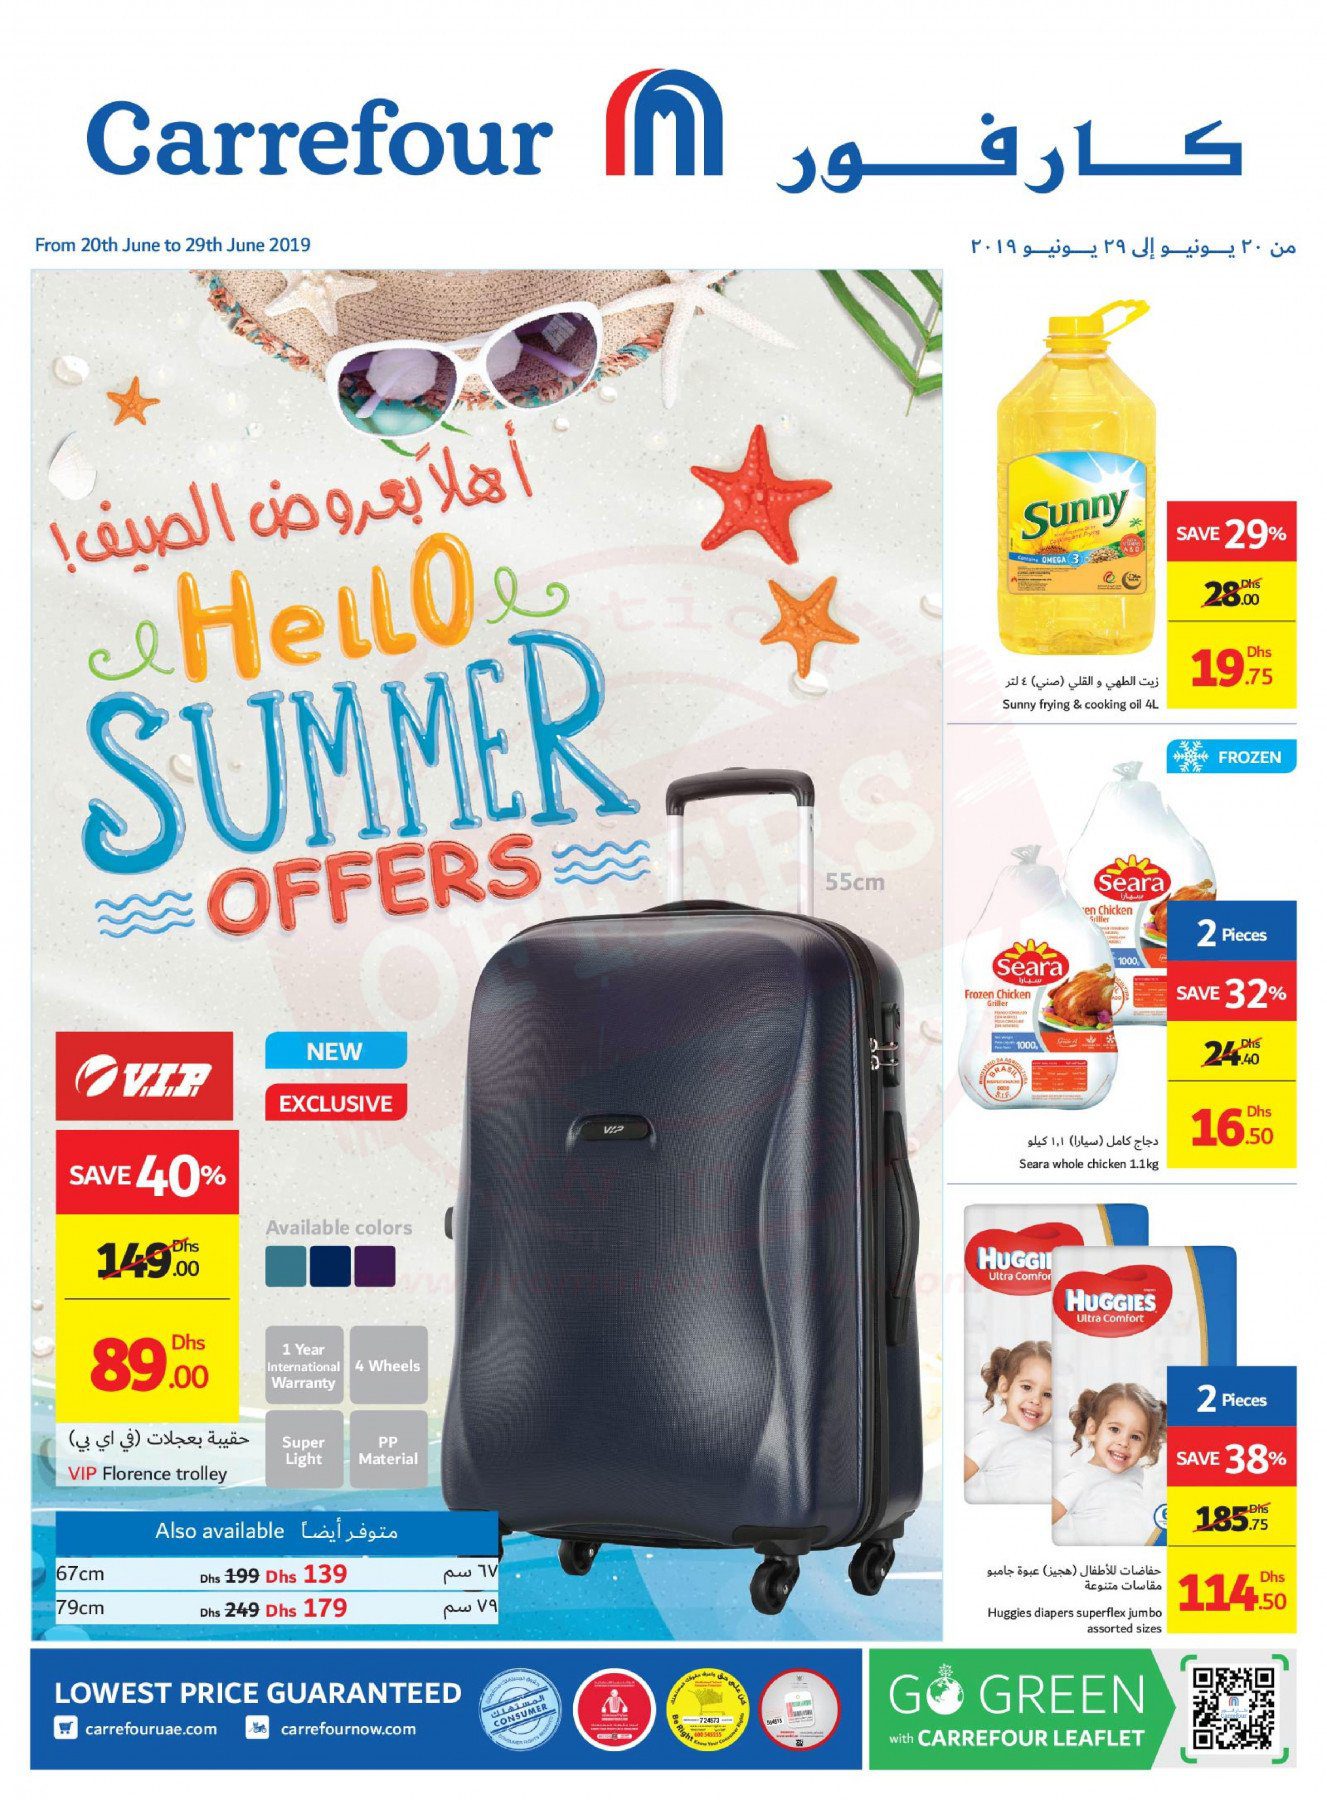 Carrefour Hello Summer Offer